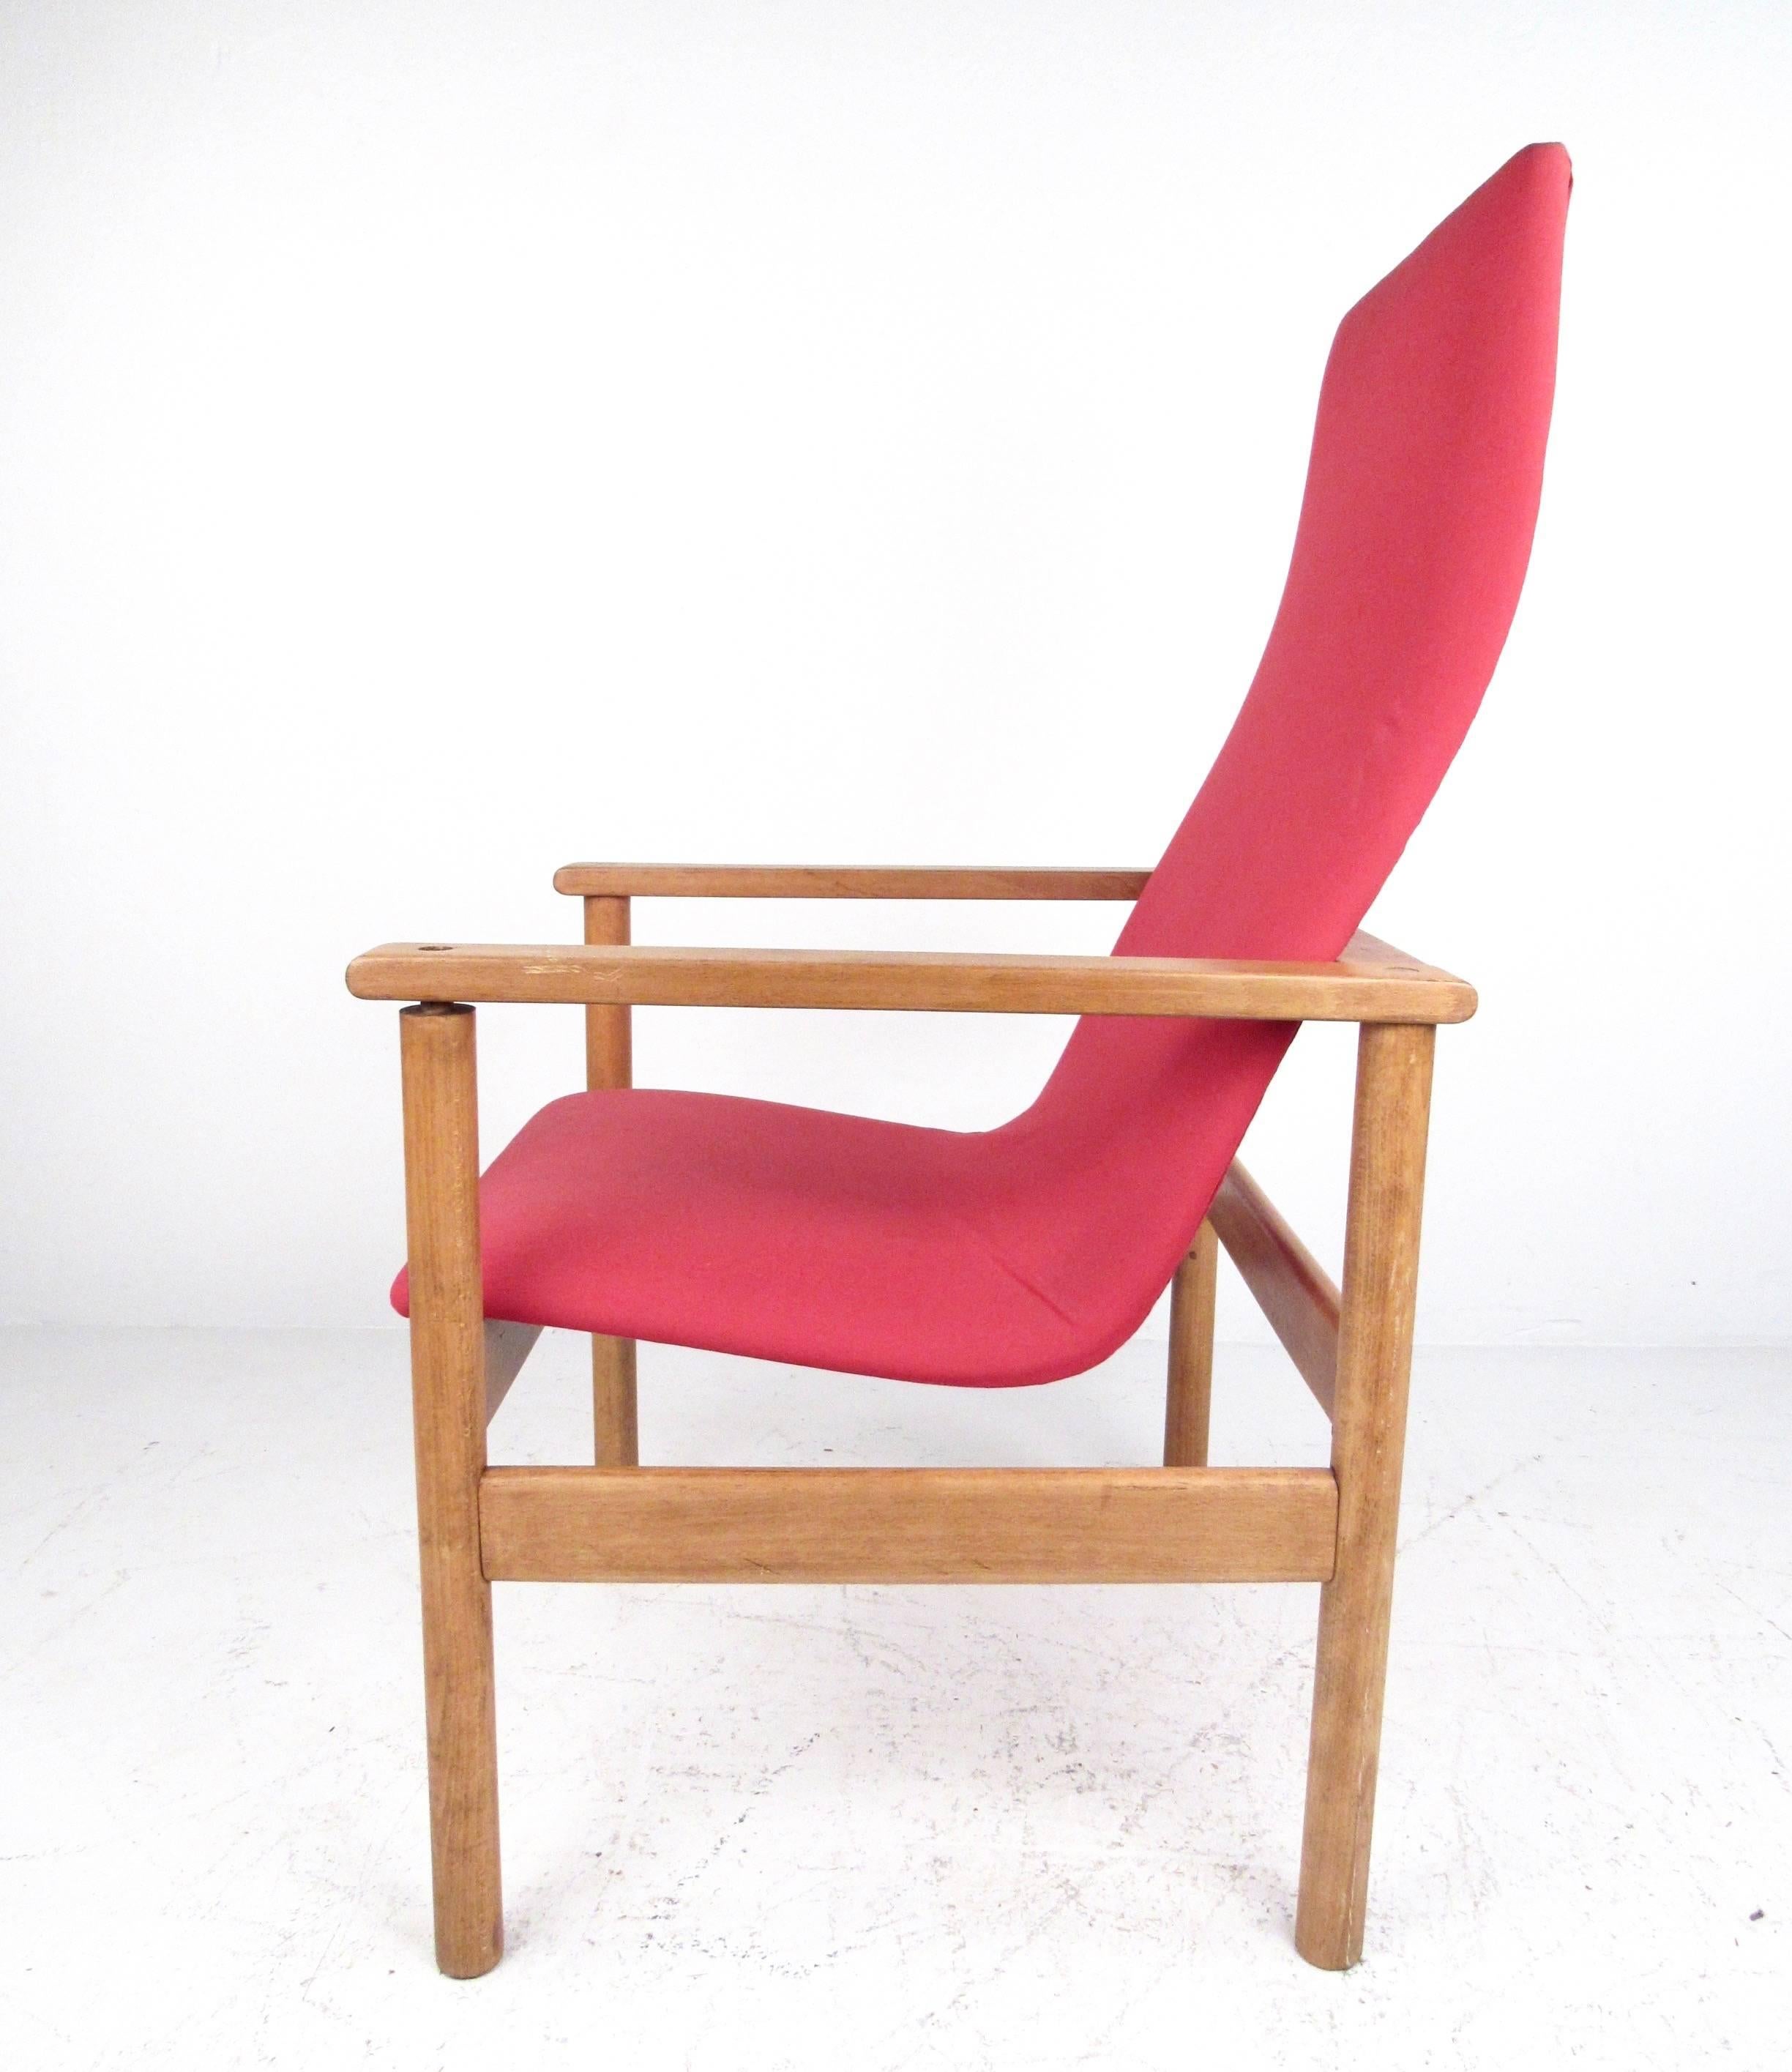 This stylish Mid-Century armchair features a vintage hardwood frame with ergonomic sculpted high back seat. Modern simplicity meets timeless style in this vintage lounge chair perfect for home or business use. Please confirm item location (NY or NJ).